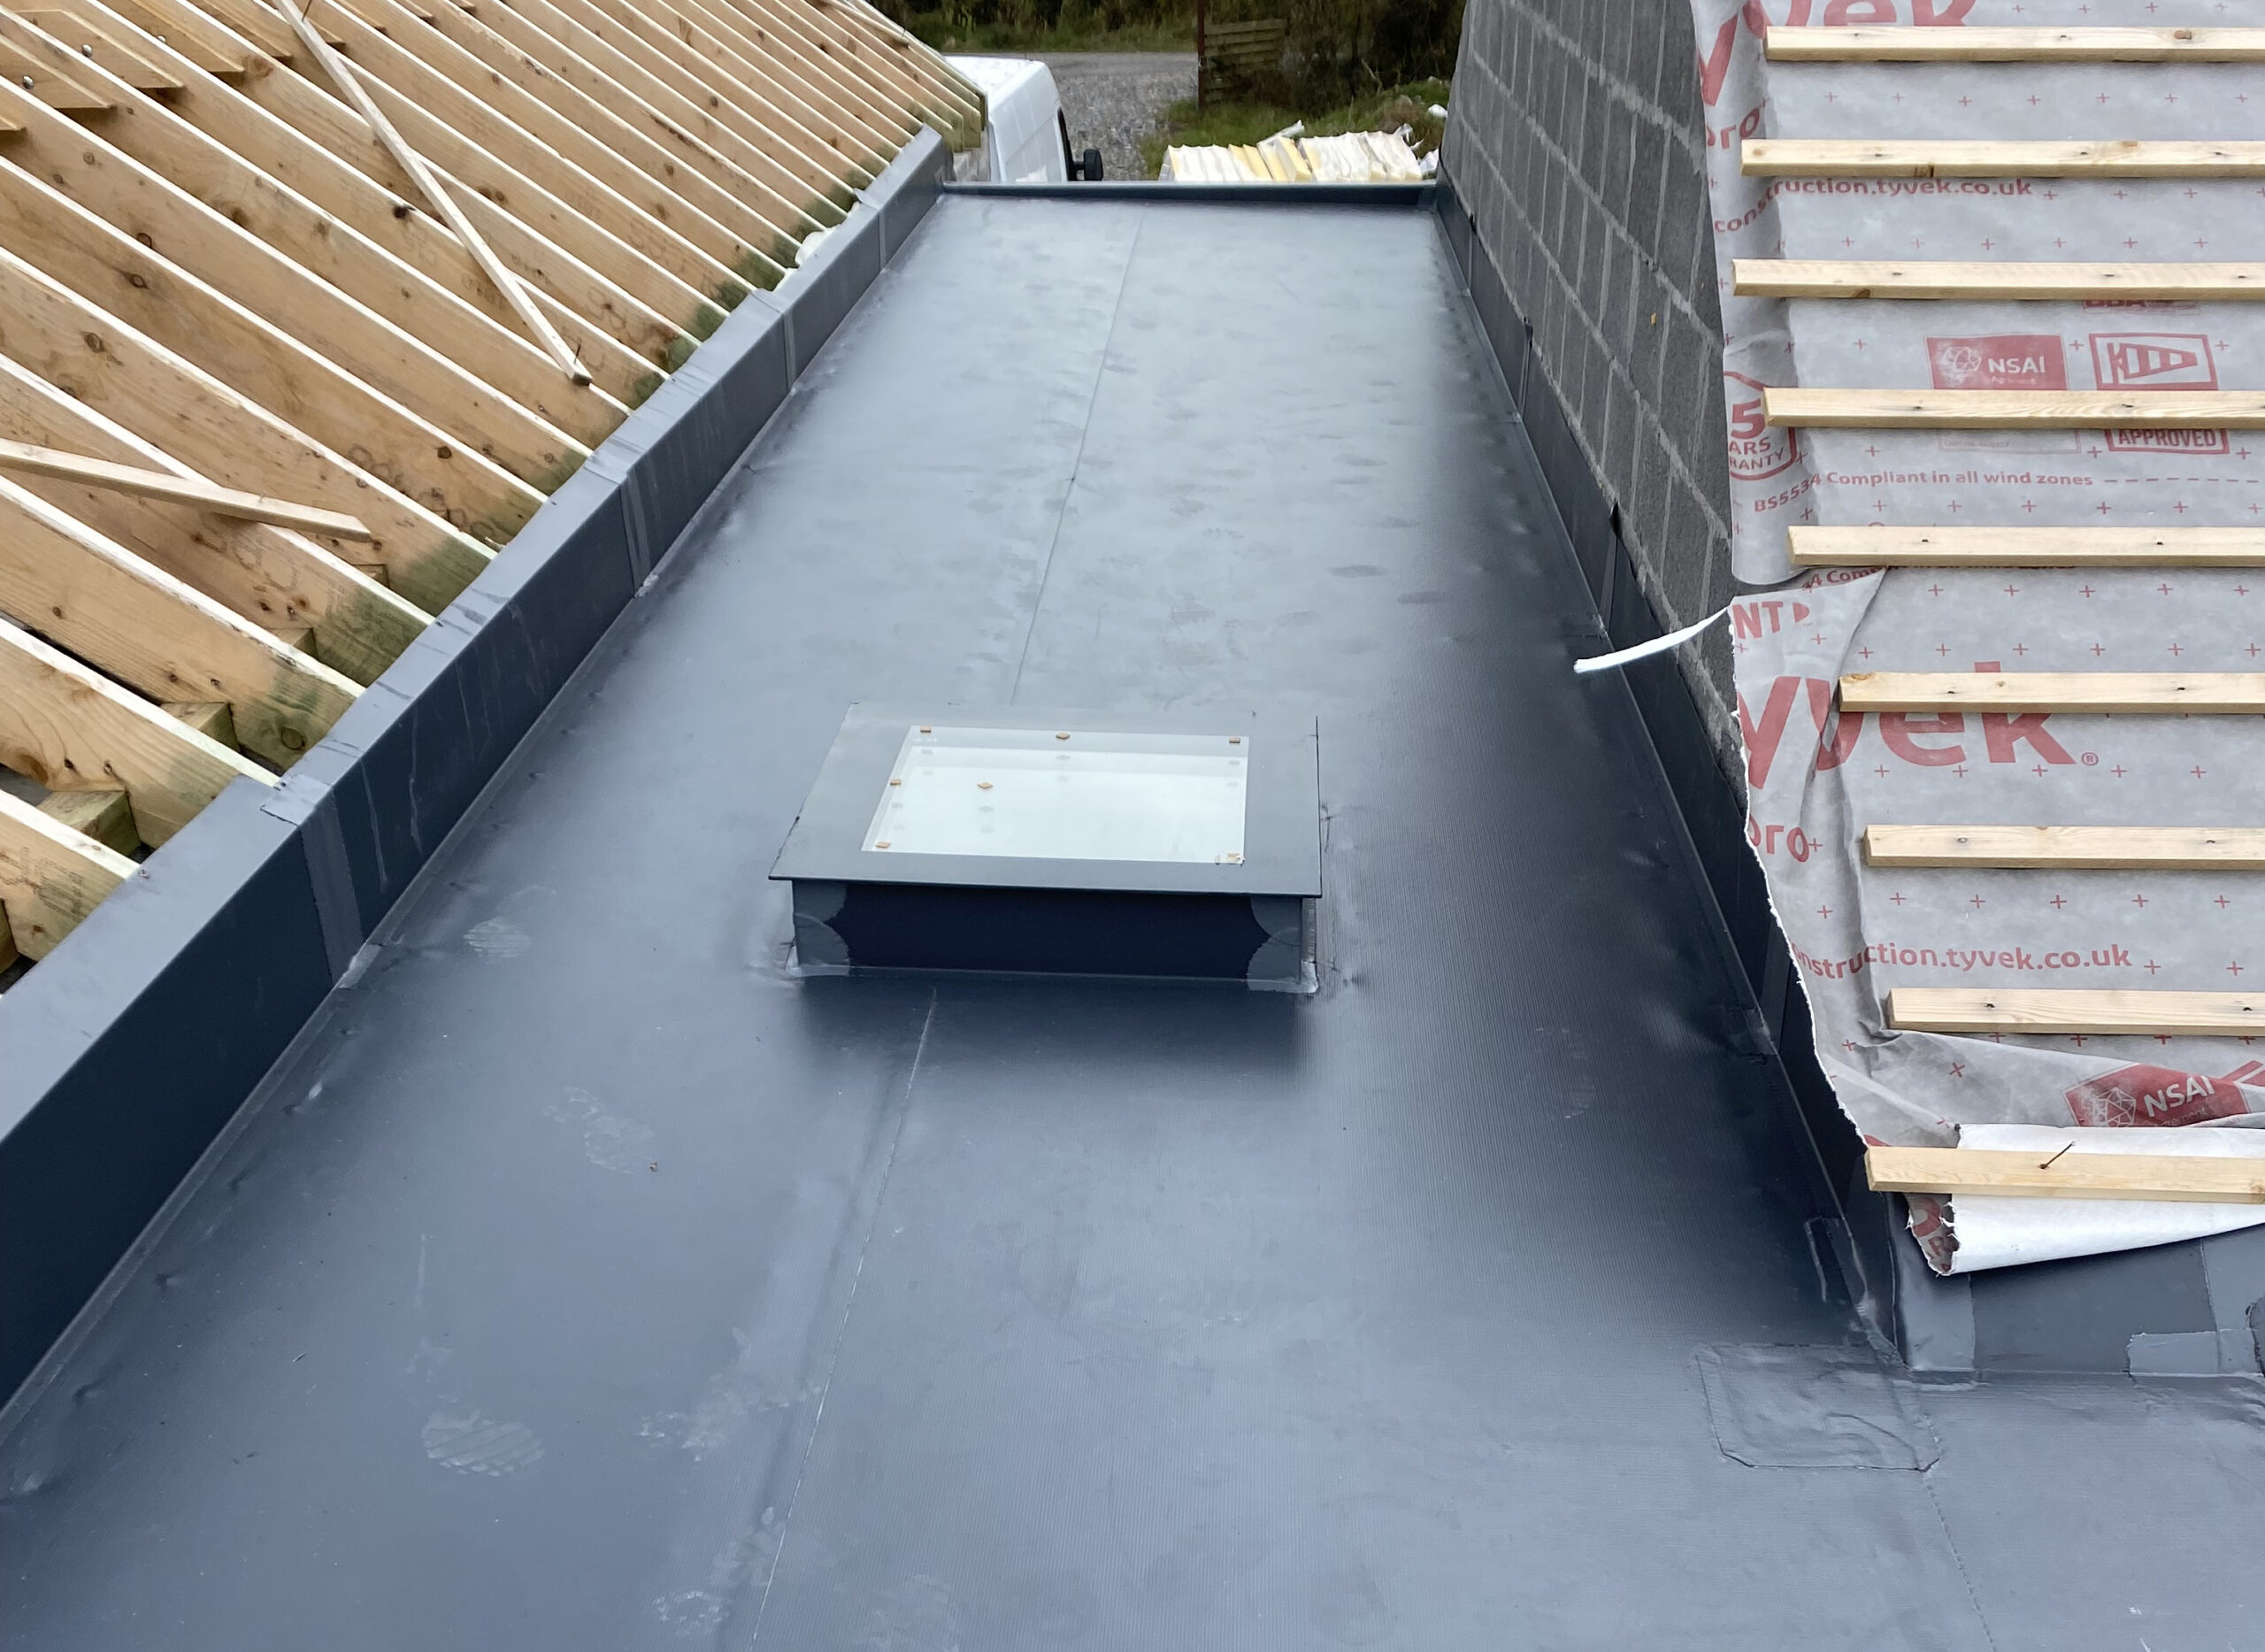 Square rooflight on flat roof between 2 other sloped roofs - roofing contractor